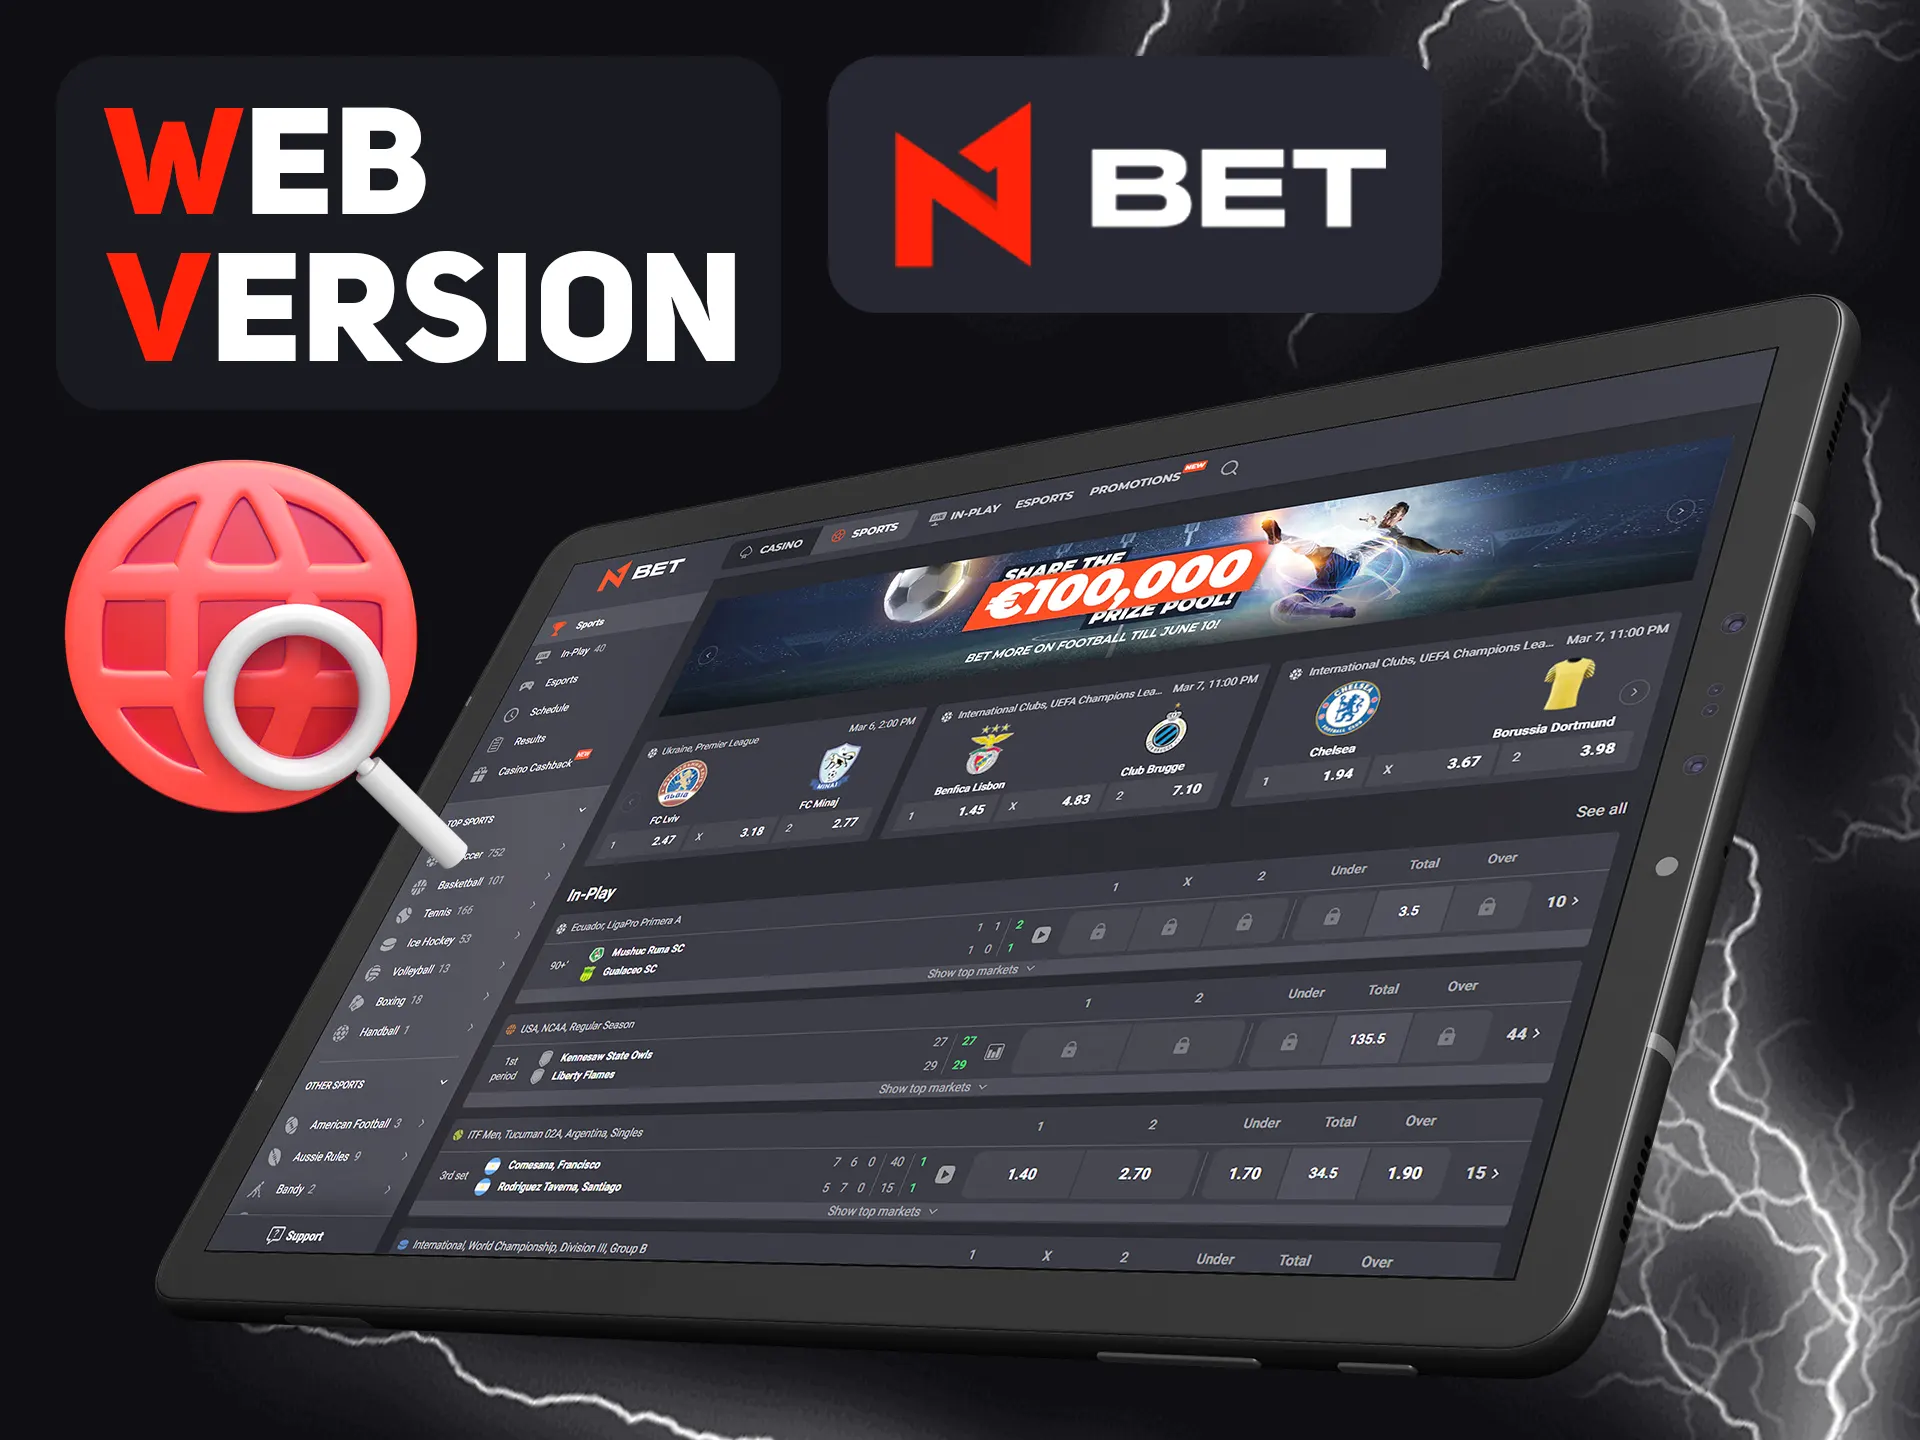 Use web verison of N1bet on any device with internet.